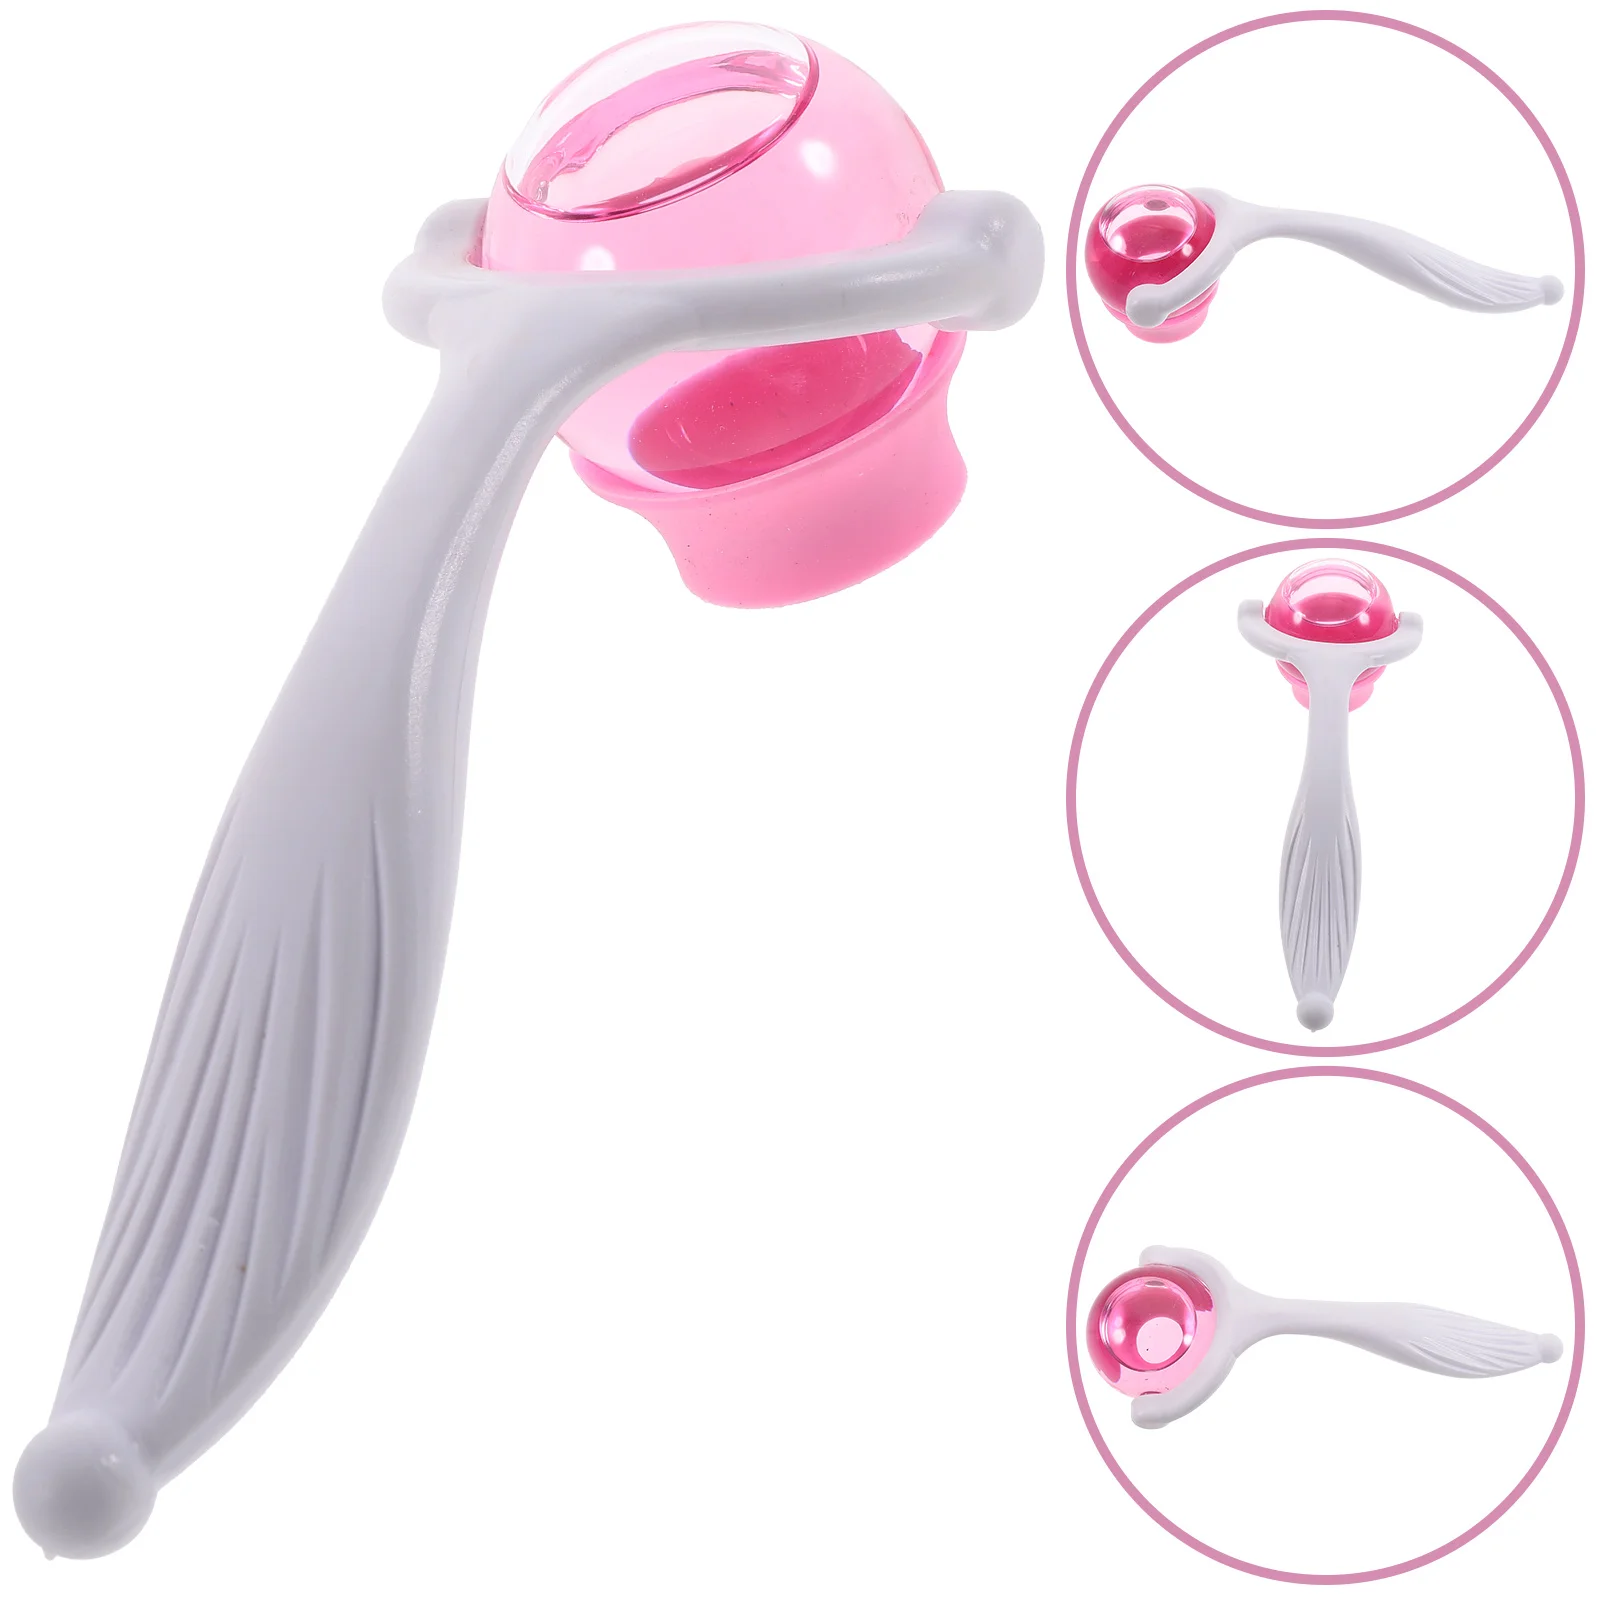 

Facial Ice Roller Beauty Gadgets Globes Face & Eye Puffiness Relief Tools Ball Press Massager Rollers Accessories